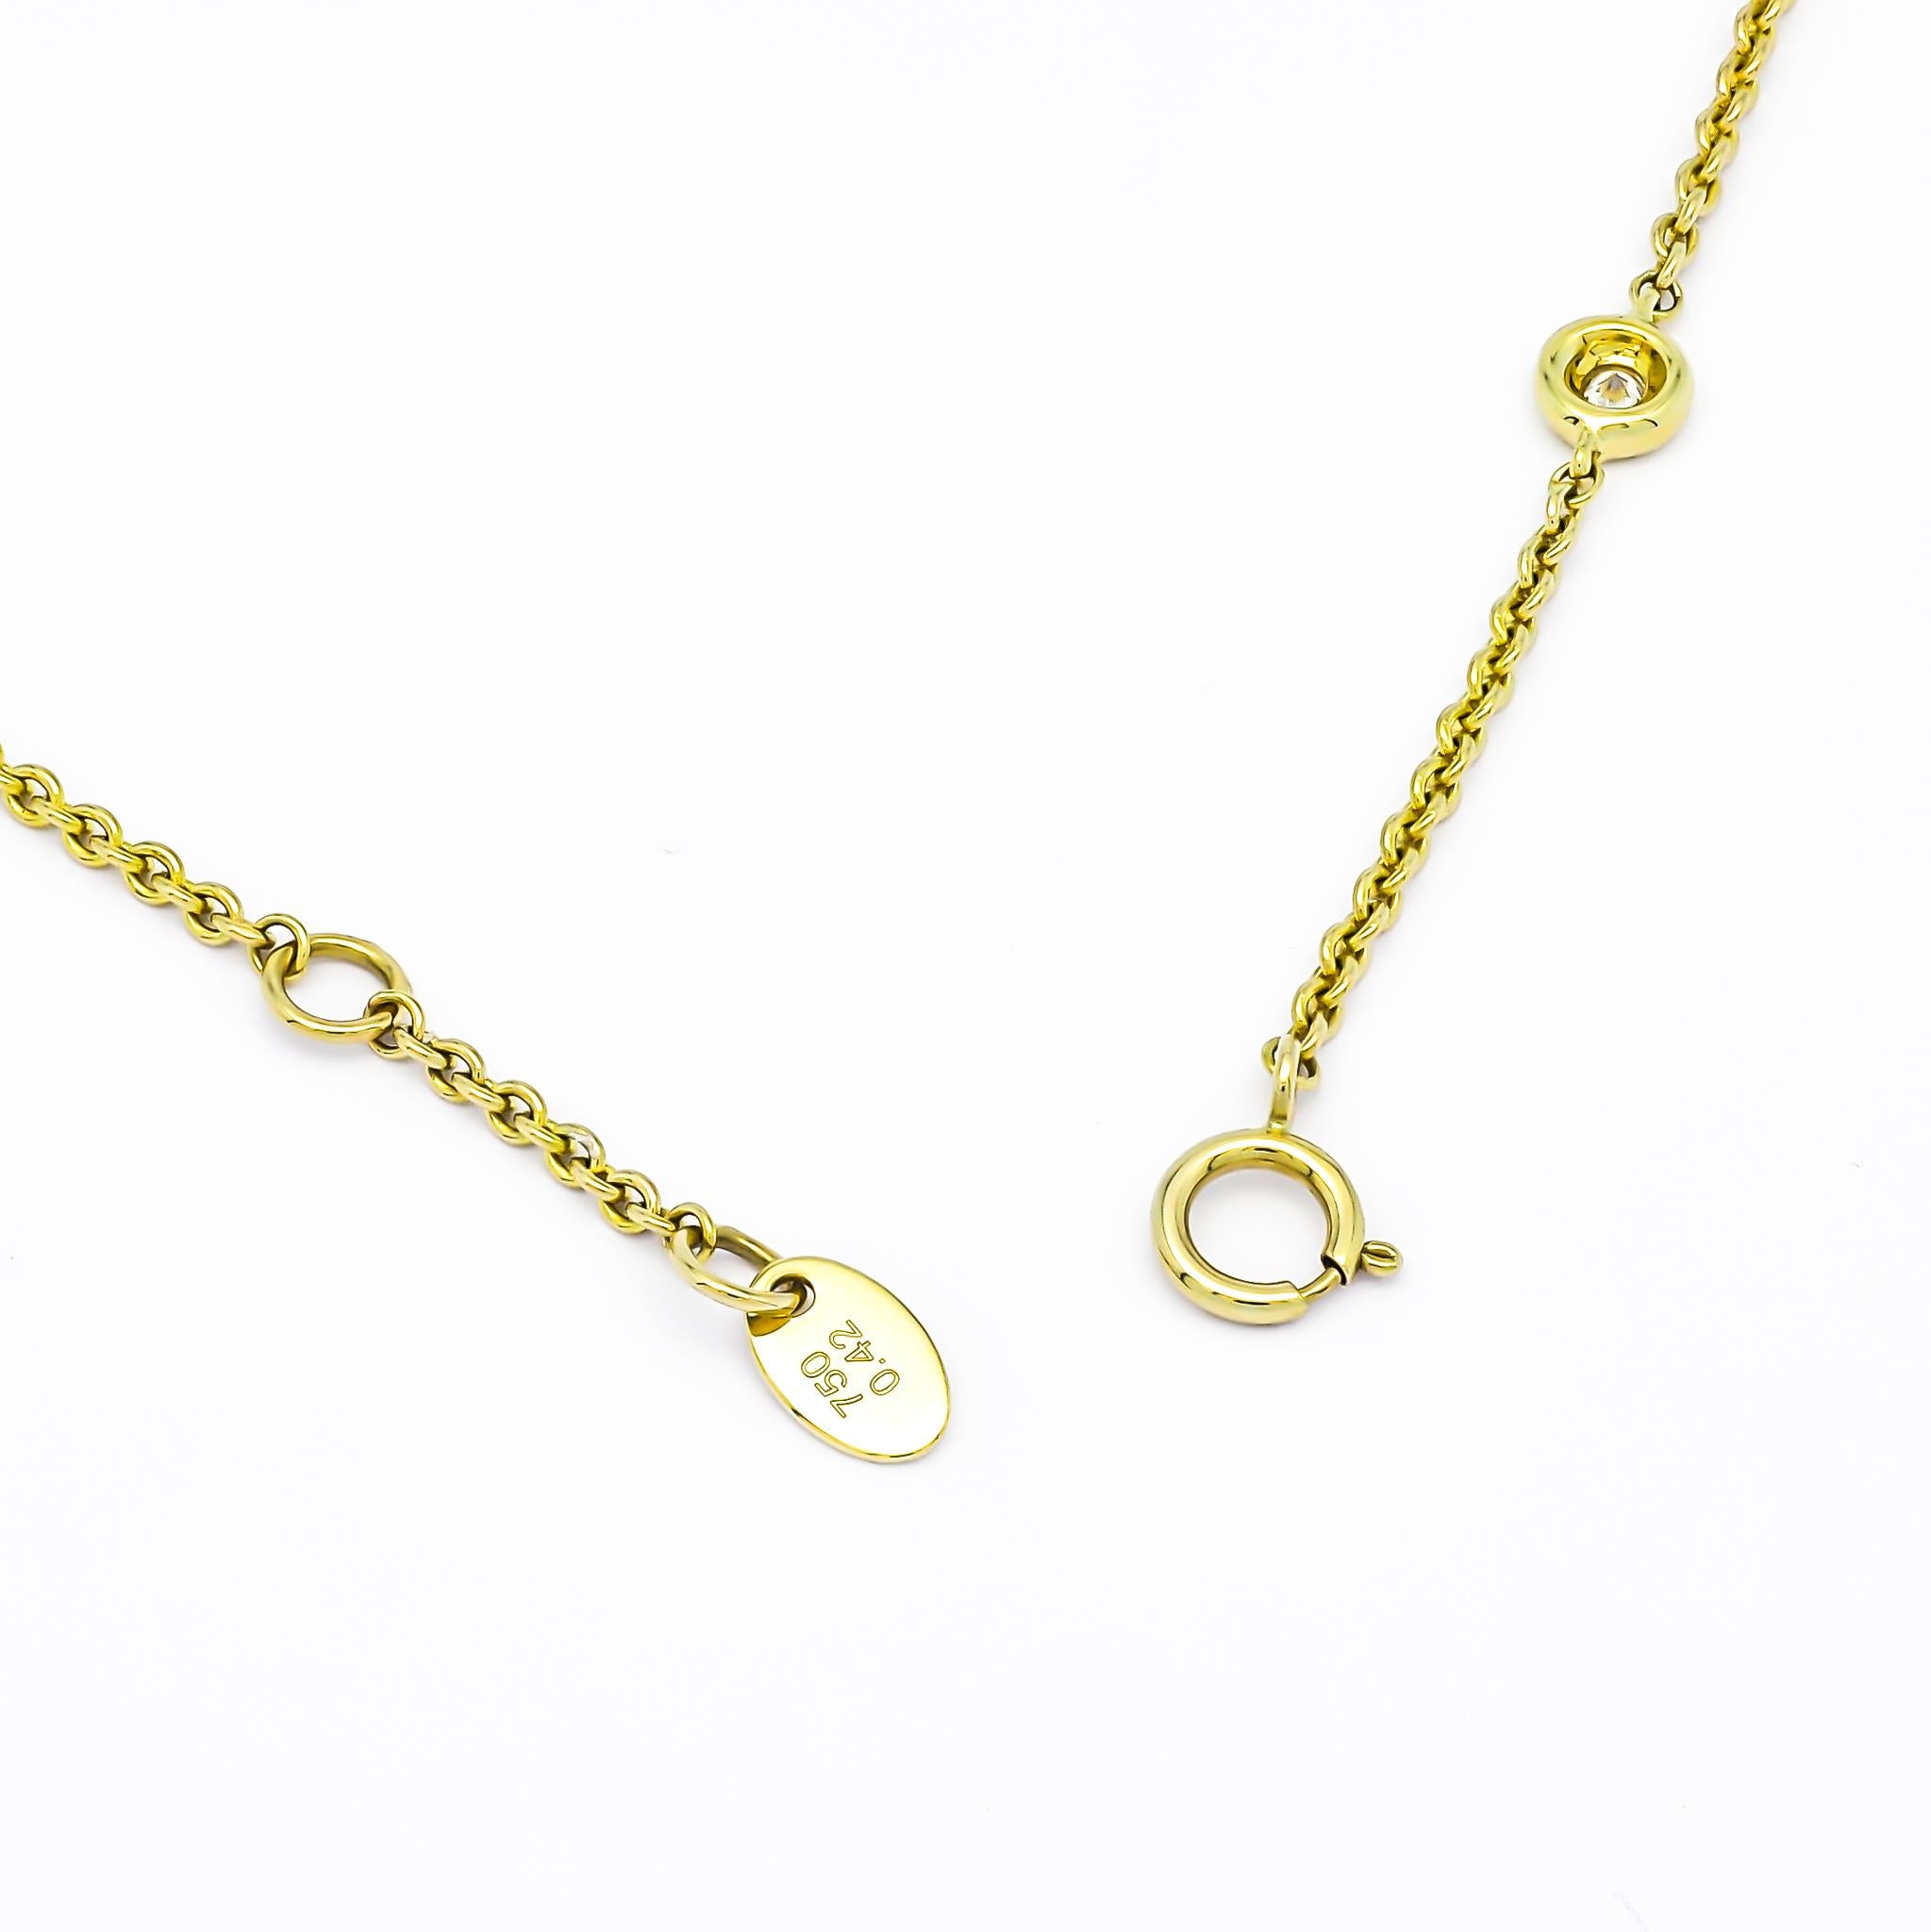  Natural Diamond Chain Necklace 0.35 cts 18 Karat Yellow Gold Chain Necklace In New Condition For Sale In Antwerpen, BE